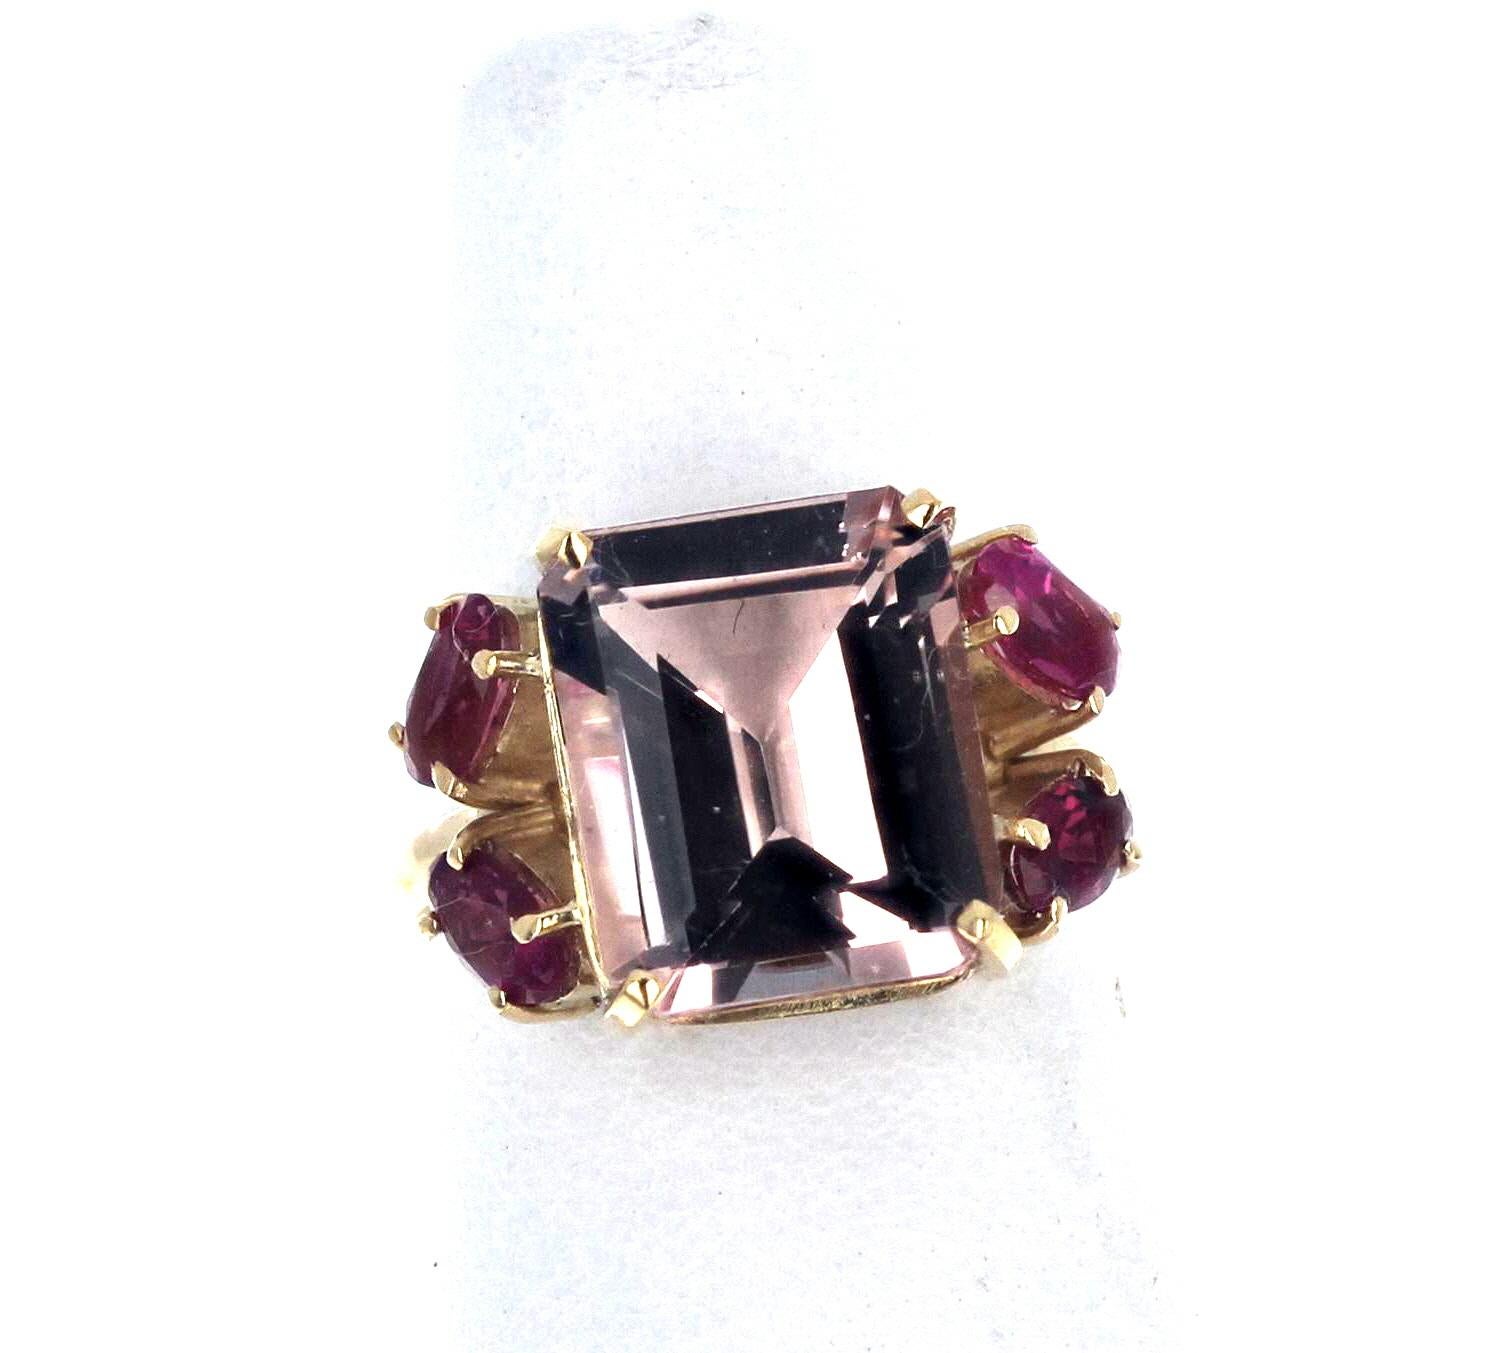 AJD GORGEOUS 4.5Ct Pink Morganite & Pink Tourmaline 18Kt Yellow Gold Ring For Sale 4